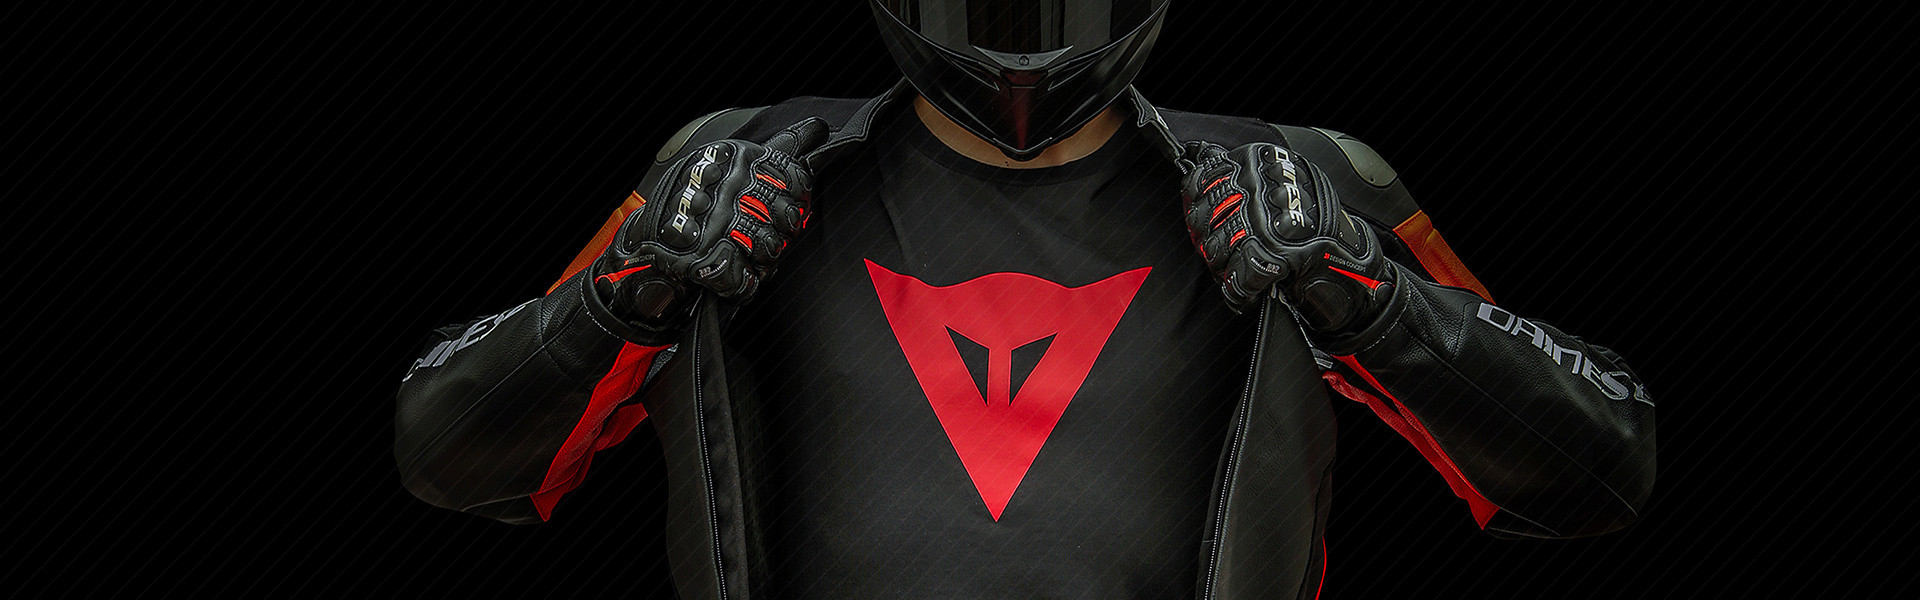 Dainese: Mission Safety